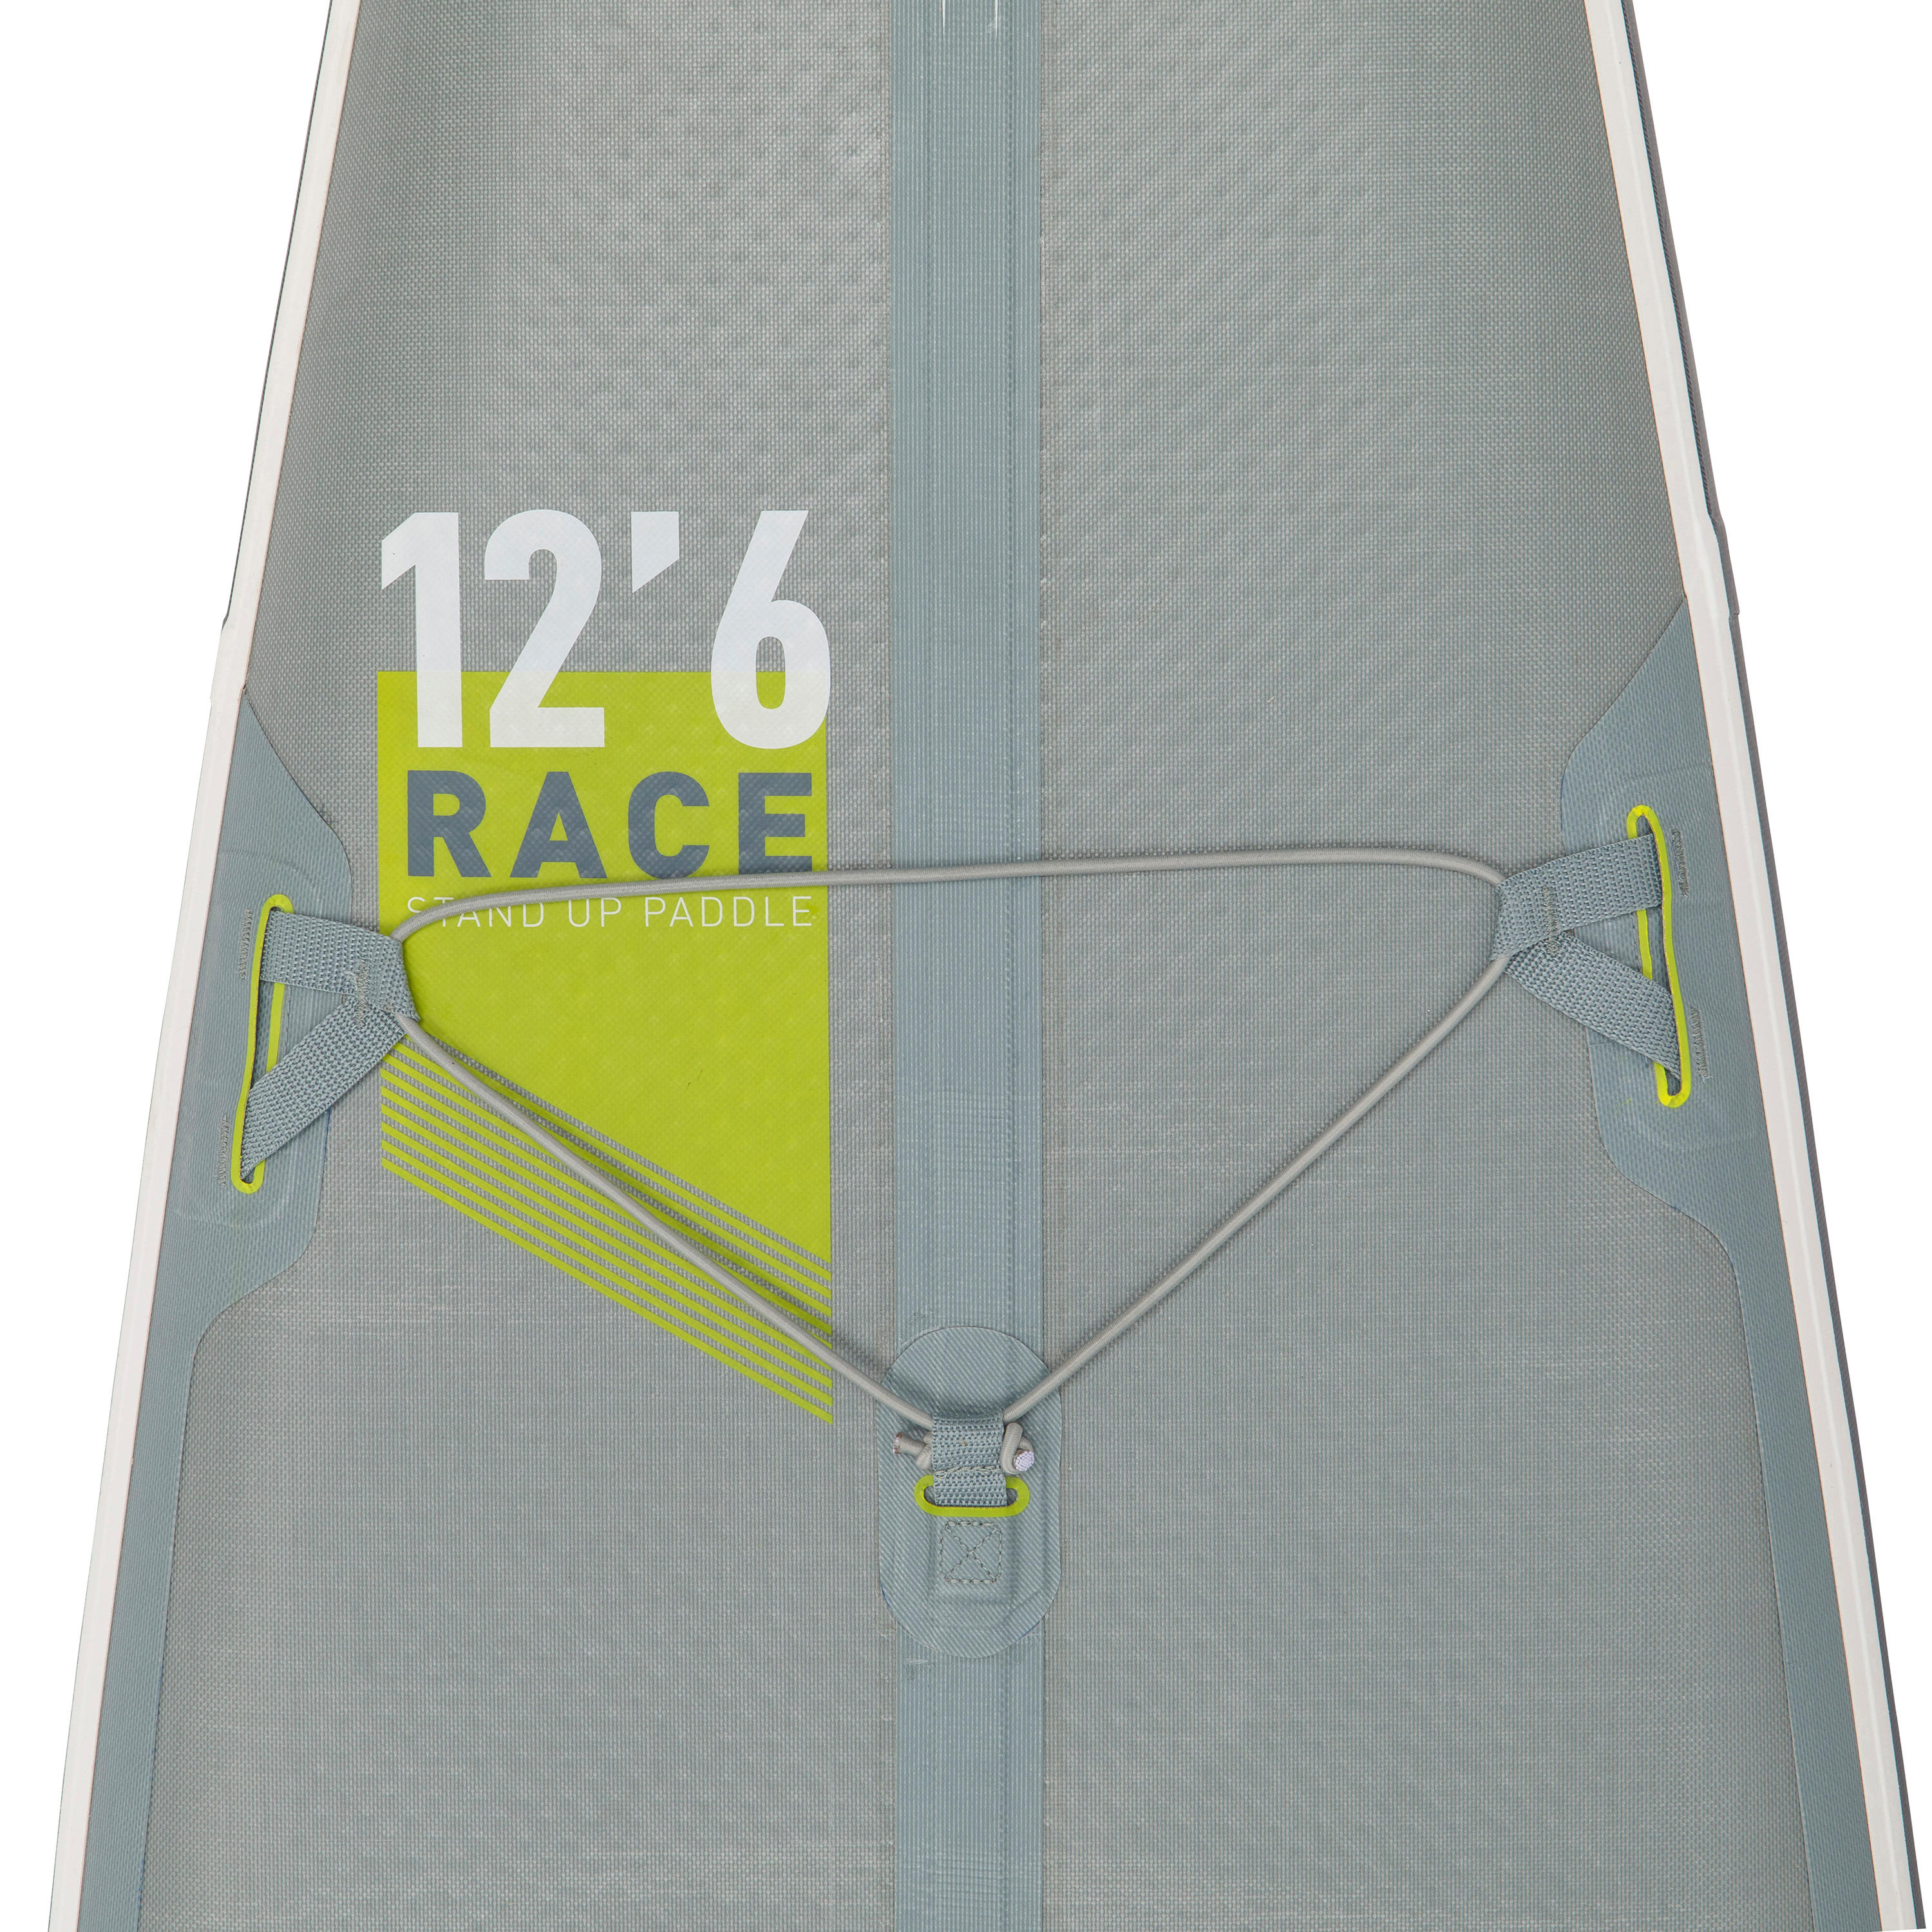 Inflatable Stand-Up Paddleboard for Racing 15/32